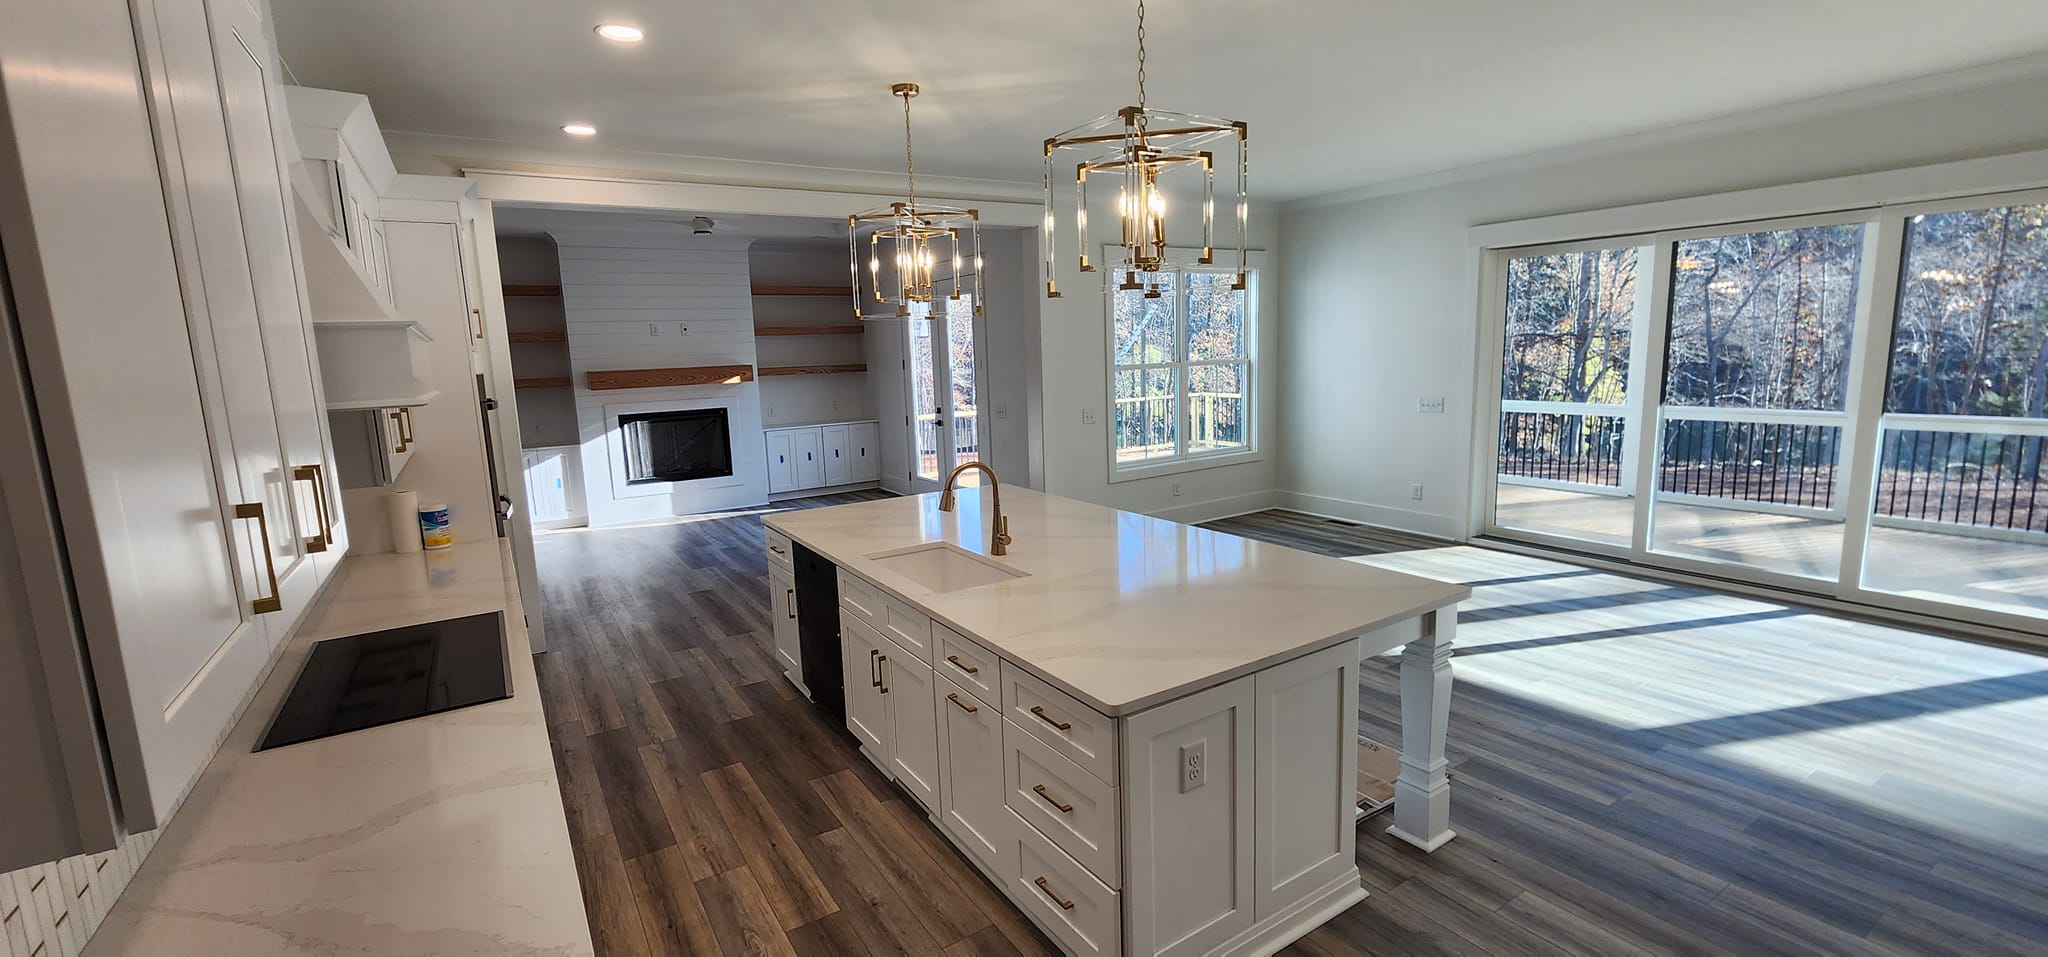 WD Smith Construction Transforms North Carolina Homes With Exceptional Kitchen and Bath Remodeling Services